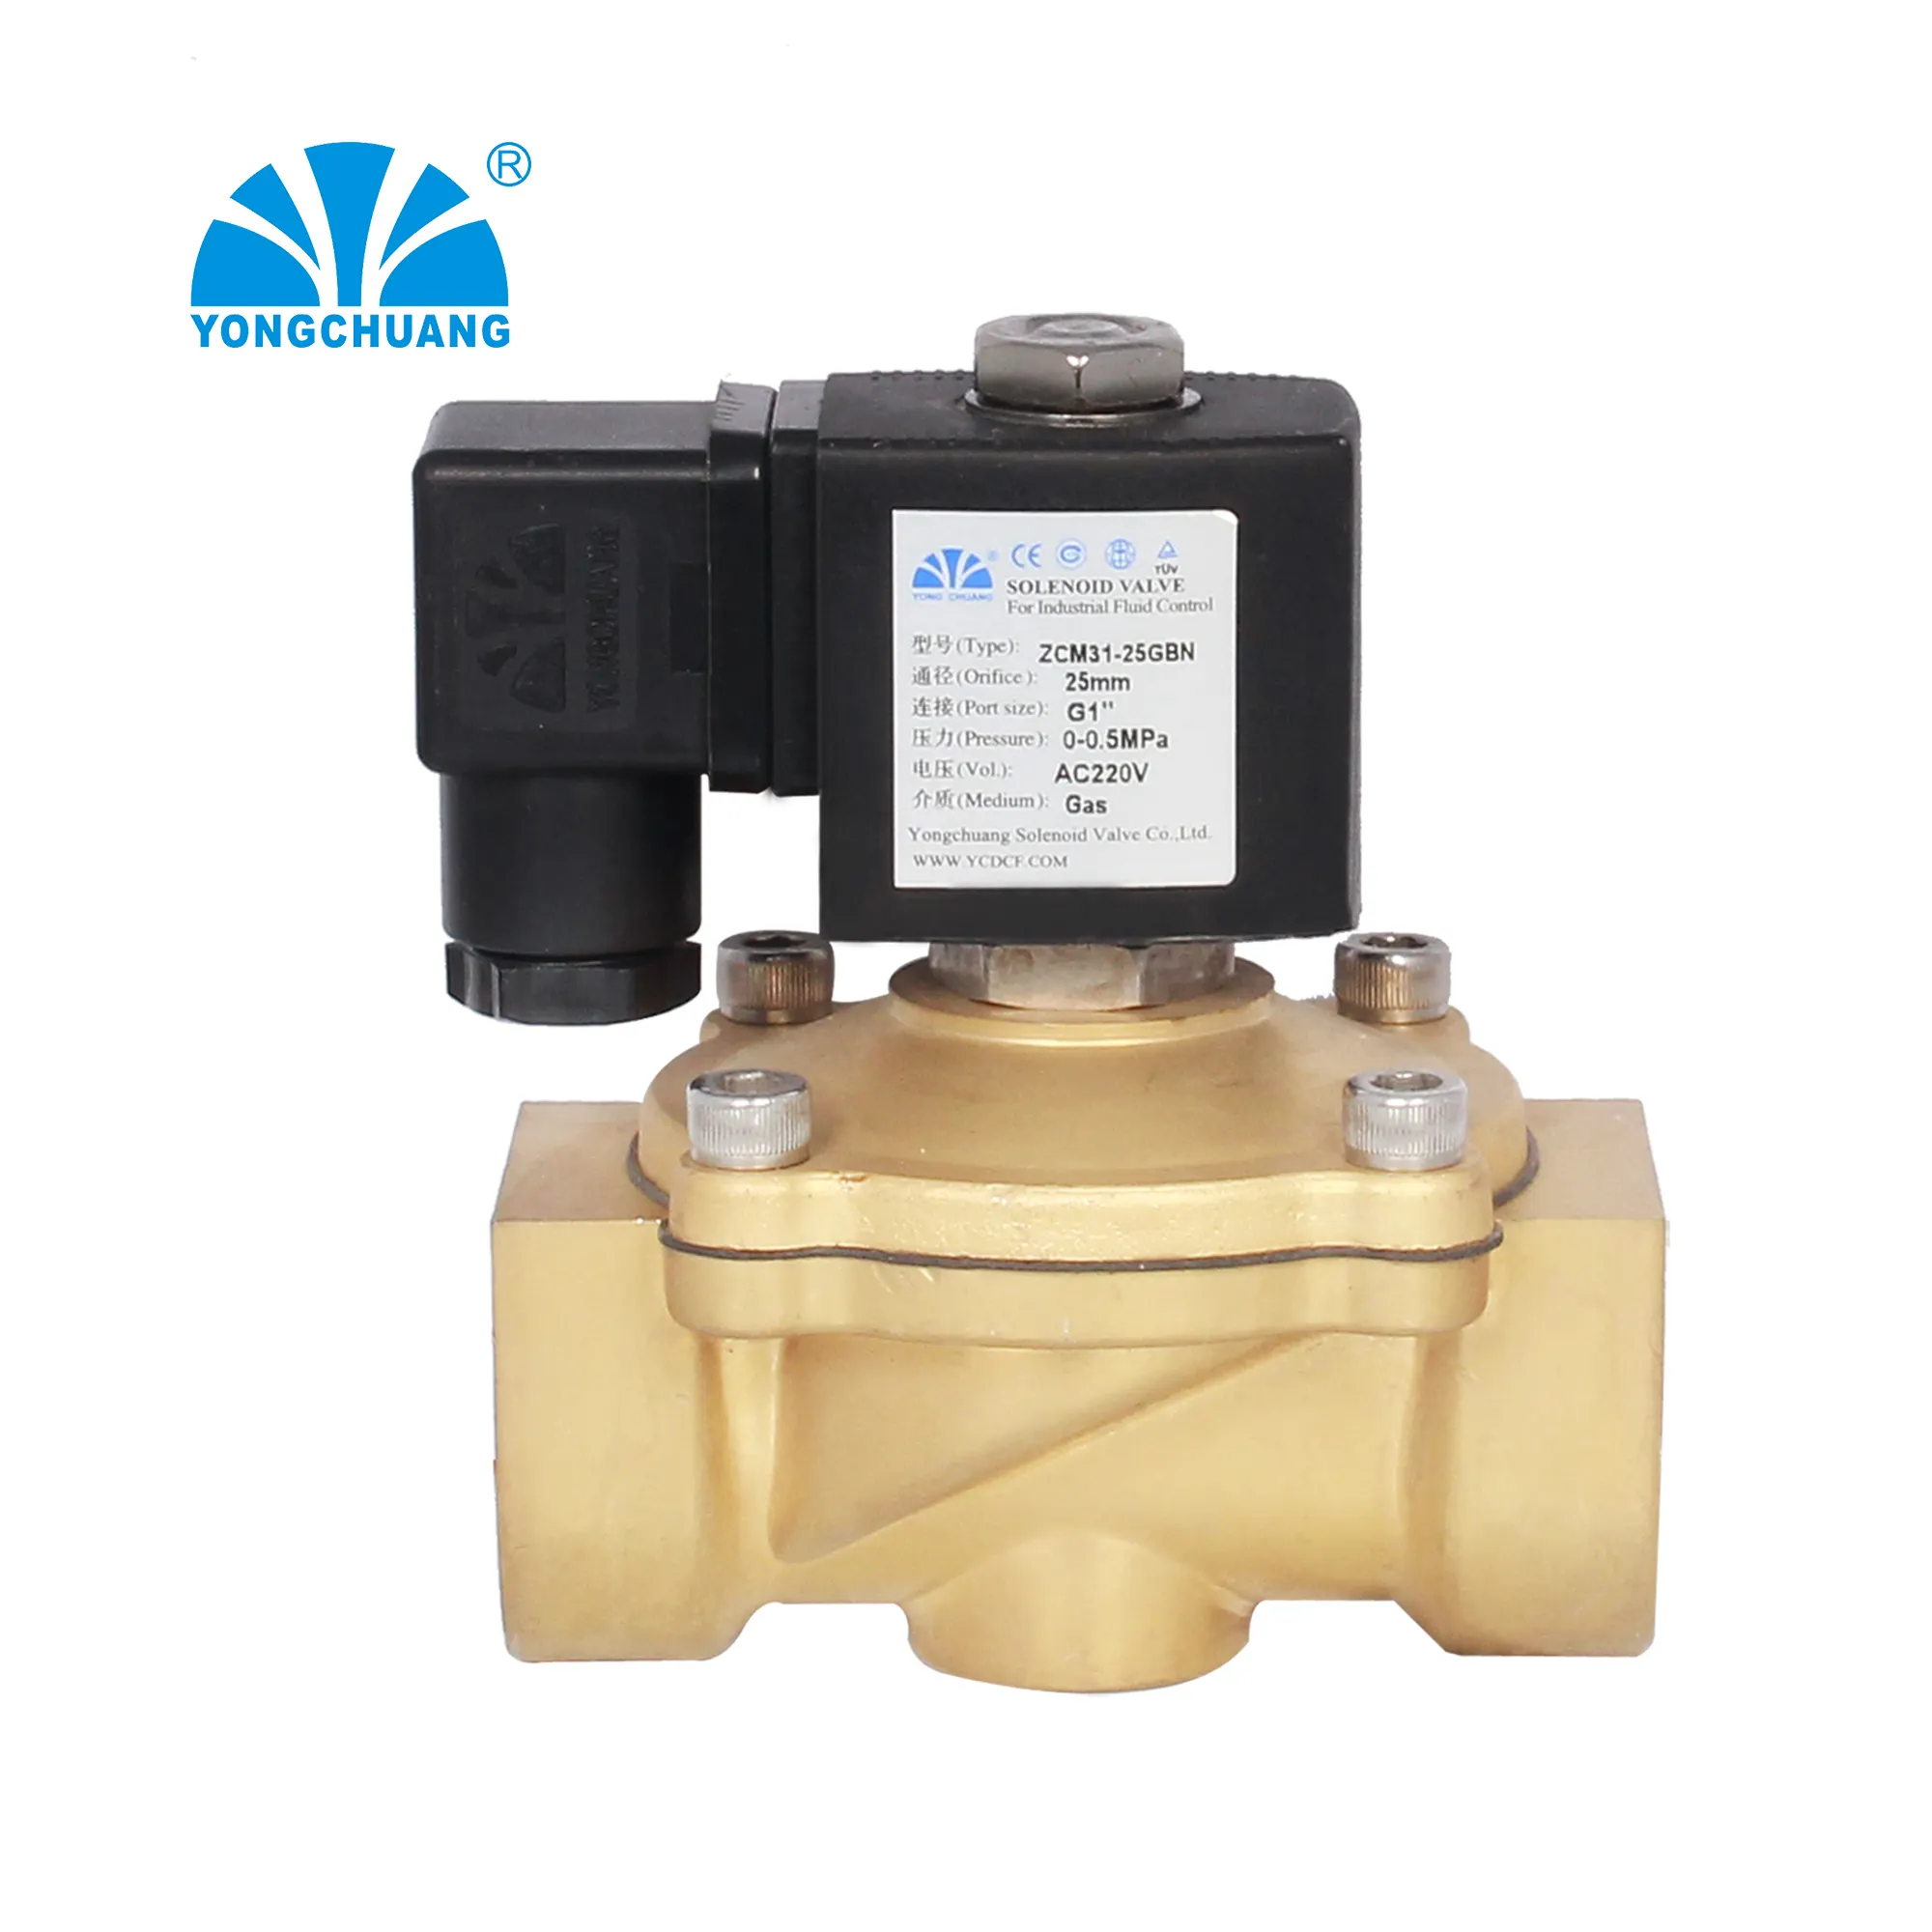 Yongchuang ZCM31 low price brass stainless steel solenoid valve for gas